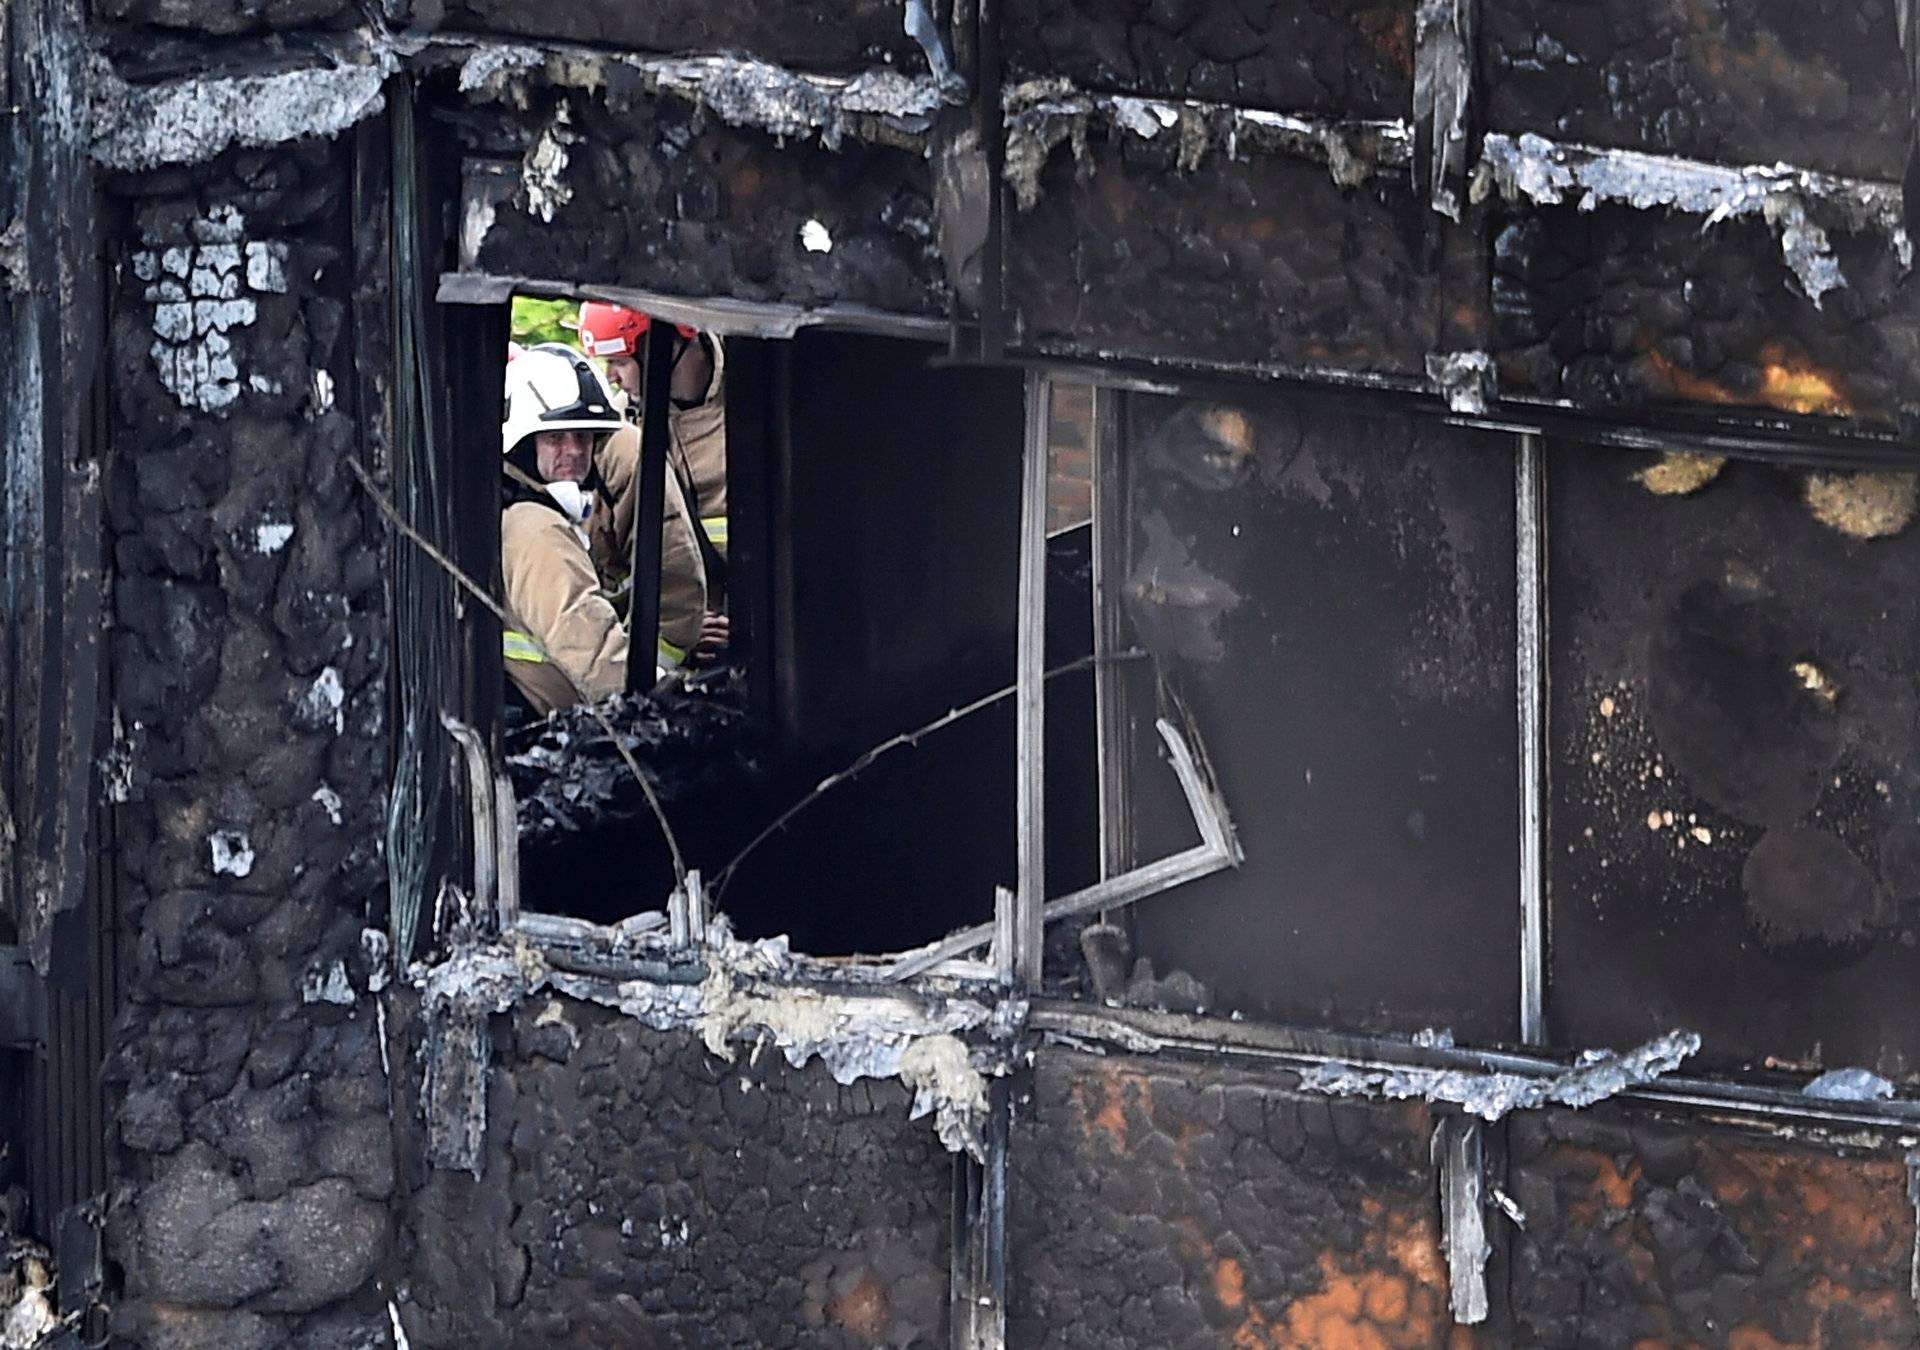 Firefighters at the Grenfell Tower block which was destroyed in a disastrous fire, in north Kensington, West London